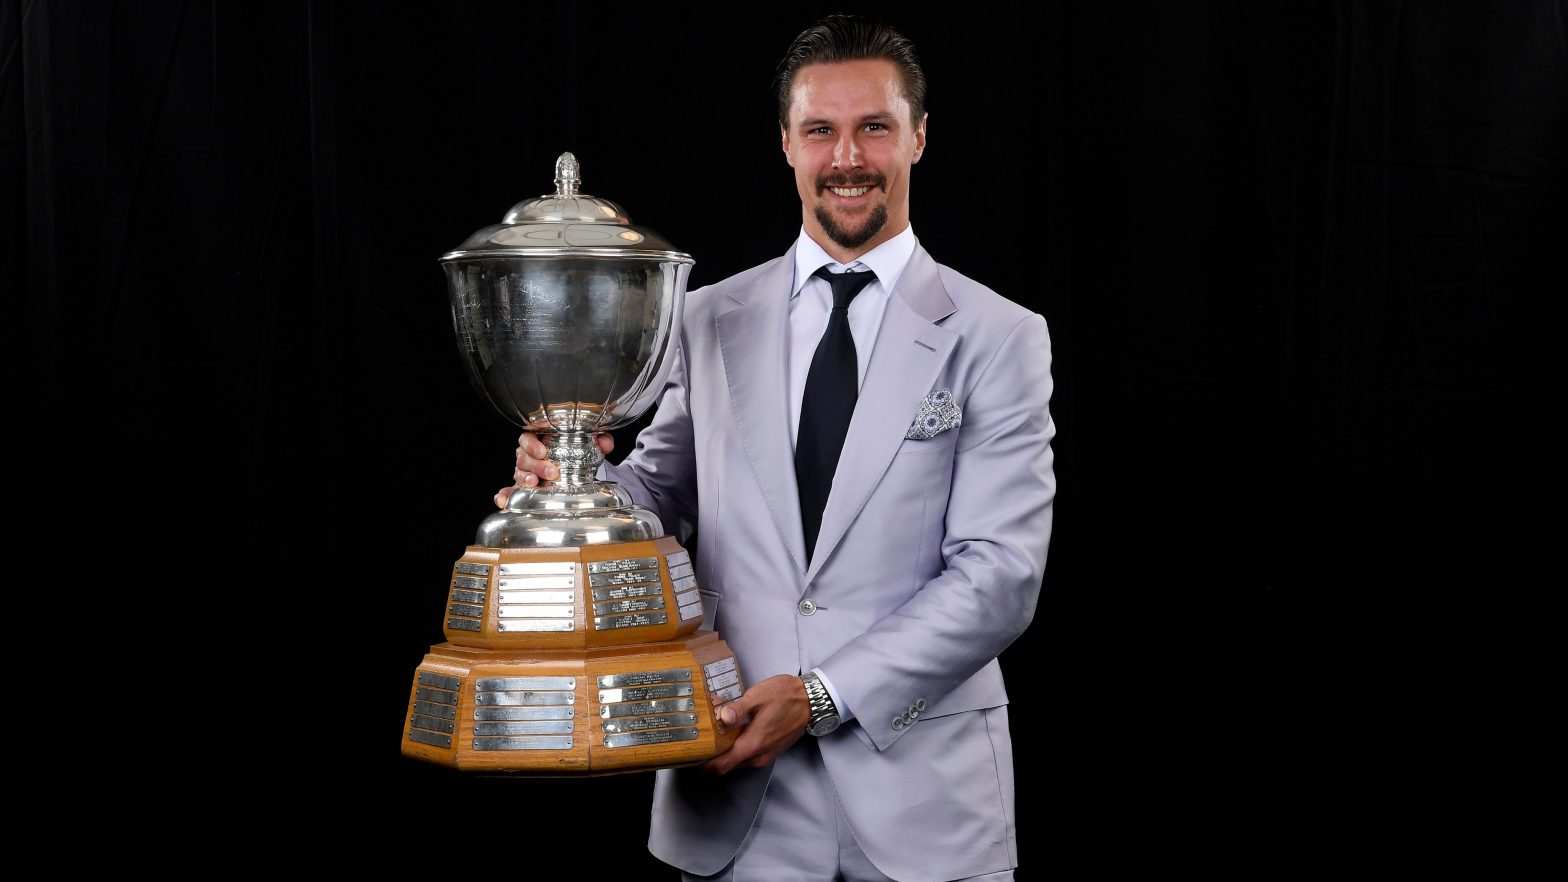 Who is Erik Karlsson? Three-time Norris Trophy winning defenseman acquired by Pittsburgh Penguins in three-team trade